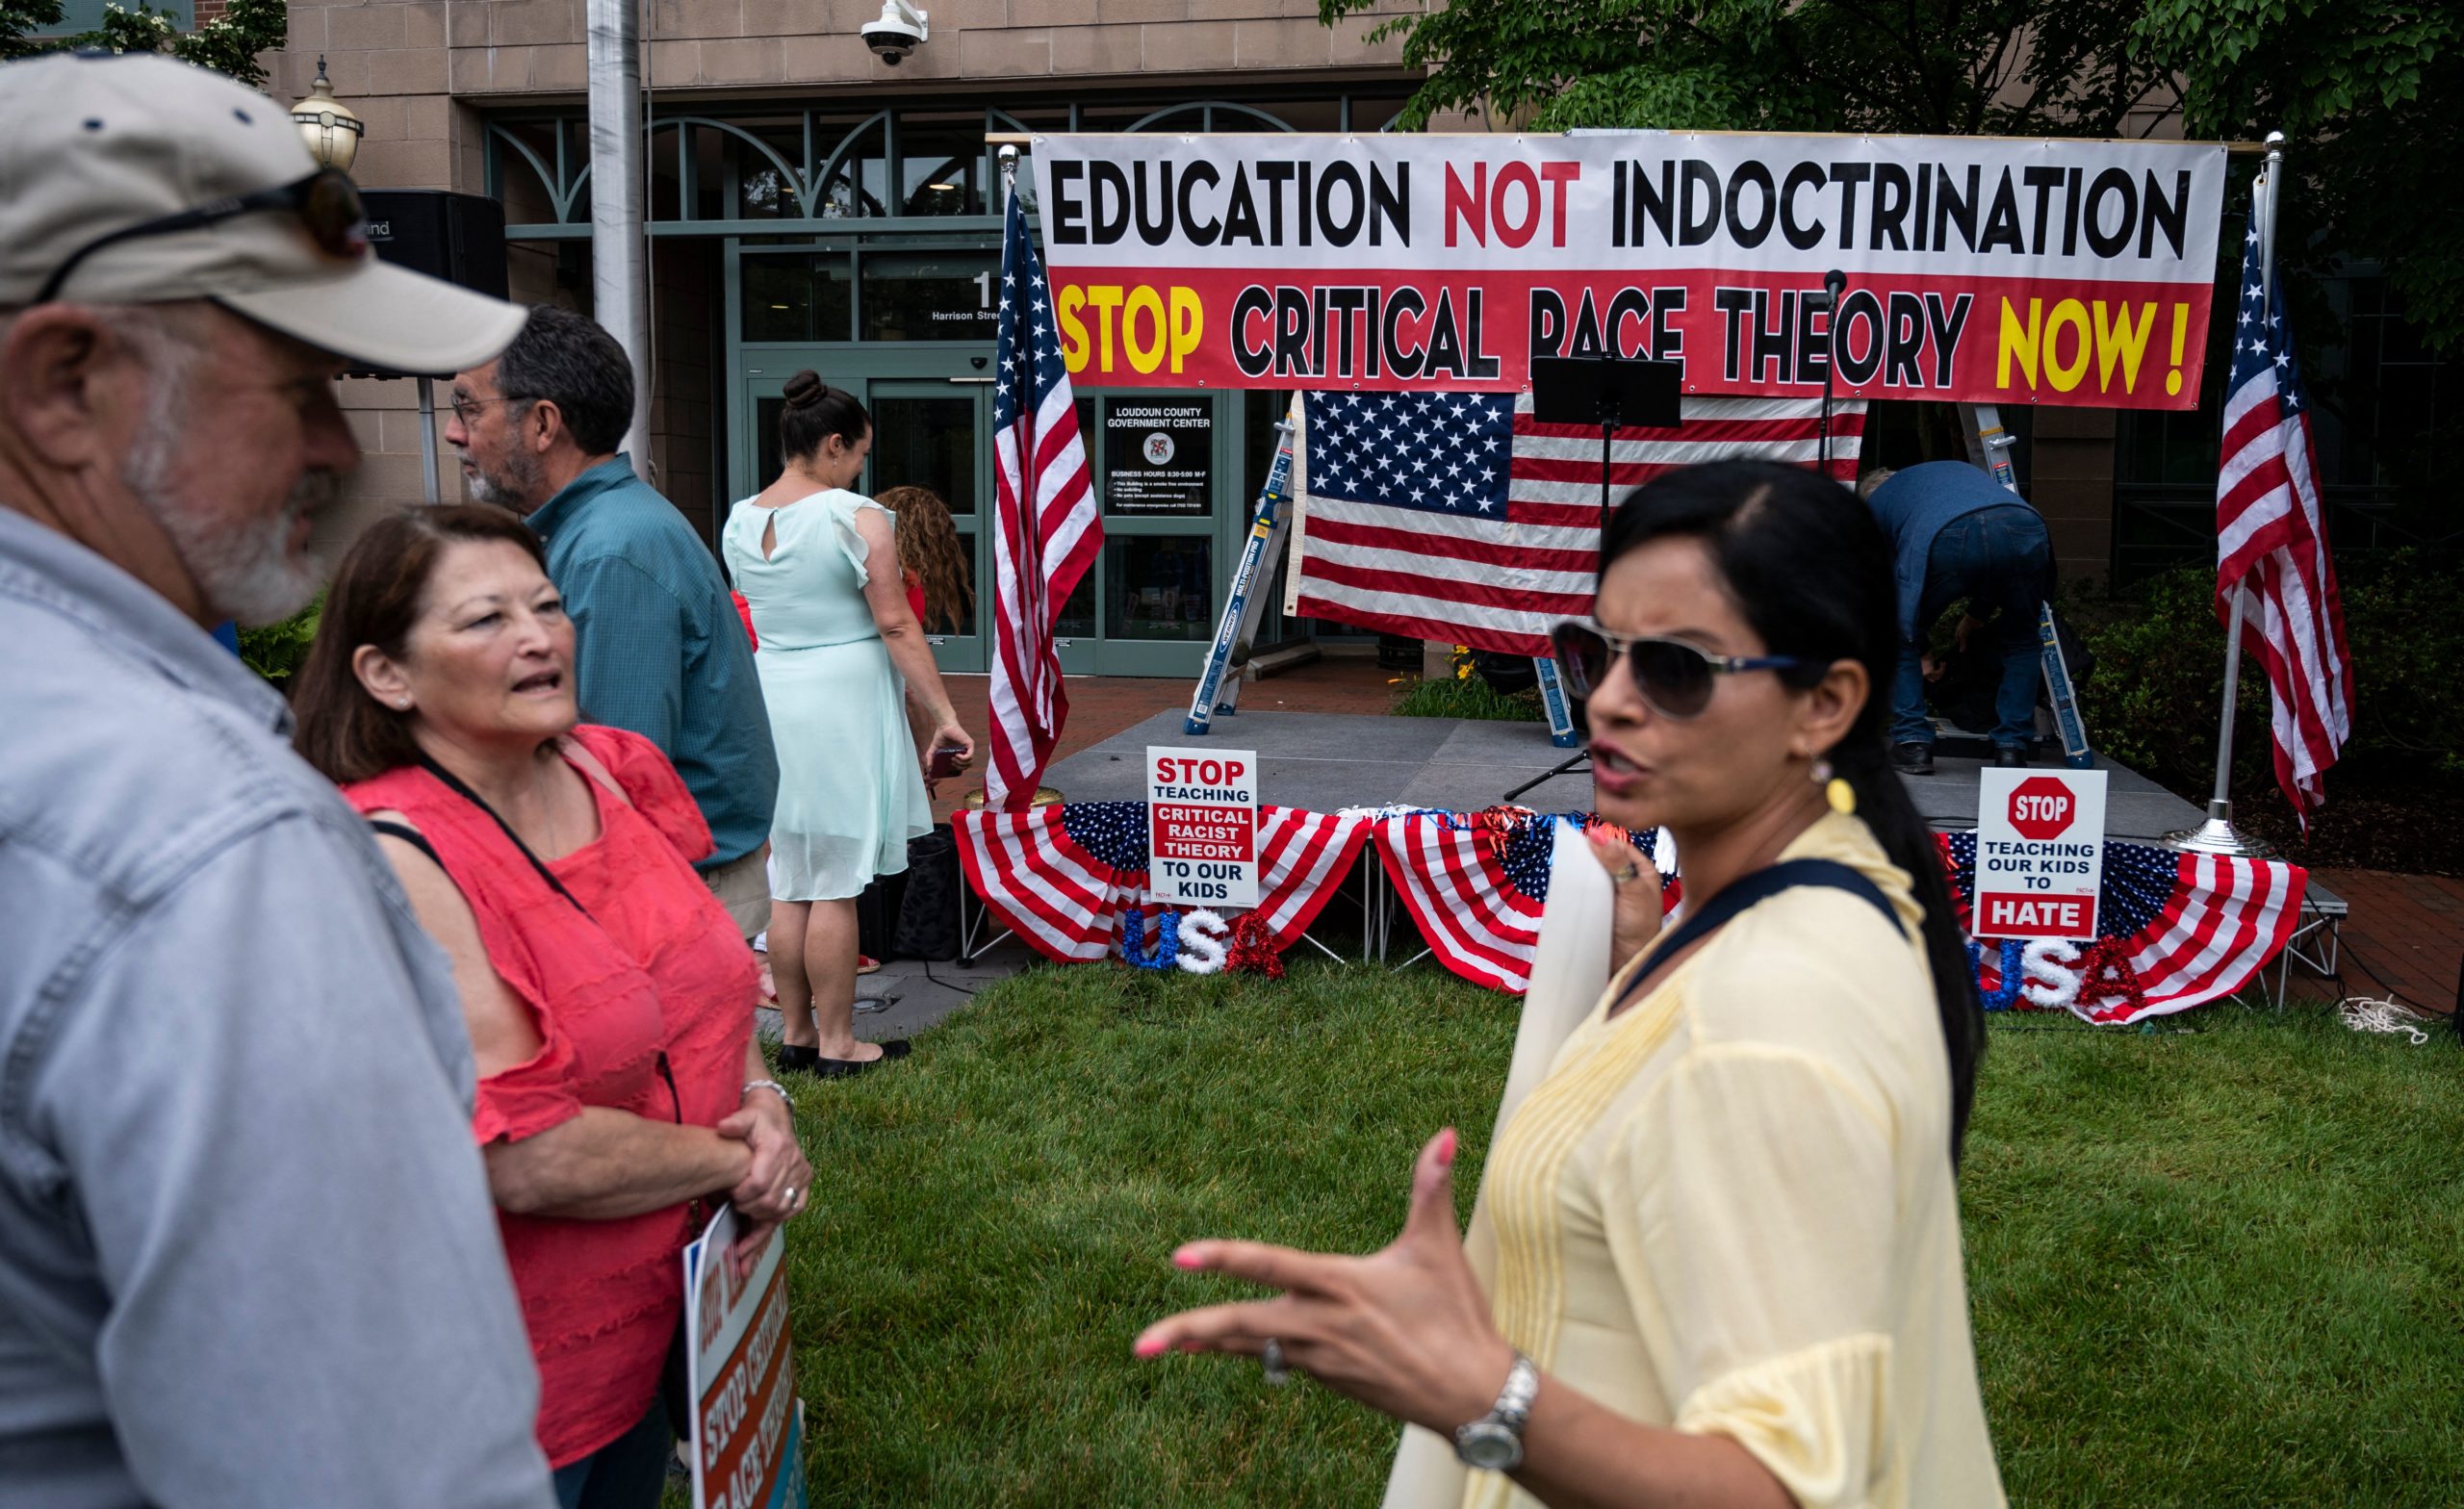 People talk before the start of a rally against "critical race theory" (CRT) being taught in schools at the Loudoun County Government center in Leesburg, Virginia on June 12, 2021. "Are you ready to take back our schools?" Republican activist Patti Menders shouted at a rally opposing anti-racism teaching that critics like her say trains white children to see themselves as "oppressors." "Yes!", answered in unison the hundreds of demonstrators gathered this weekend near Washington to fight against "critical race theory," the latest battleground of America's ongoing culture wars. (Photo by ANDREW CABALLERO-REYNOLDS/AFP via Getty Images)